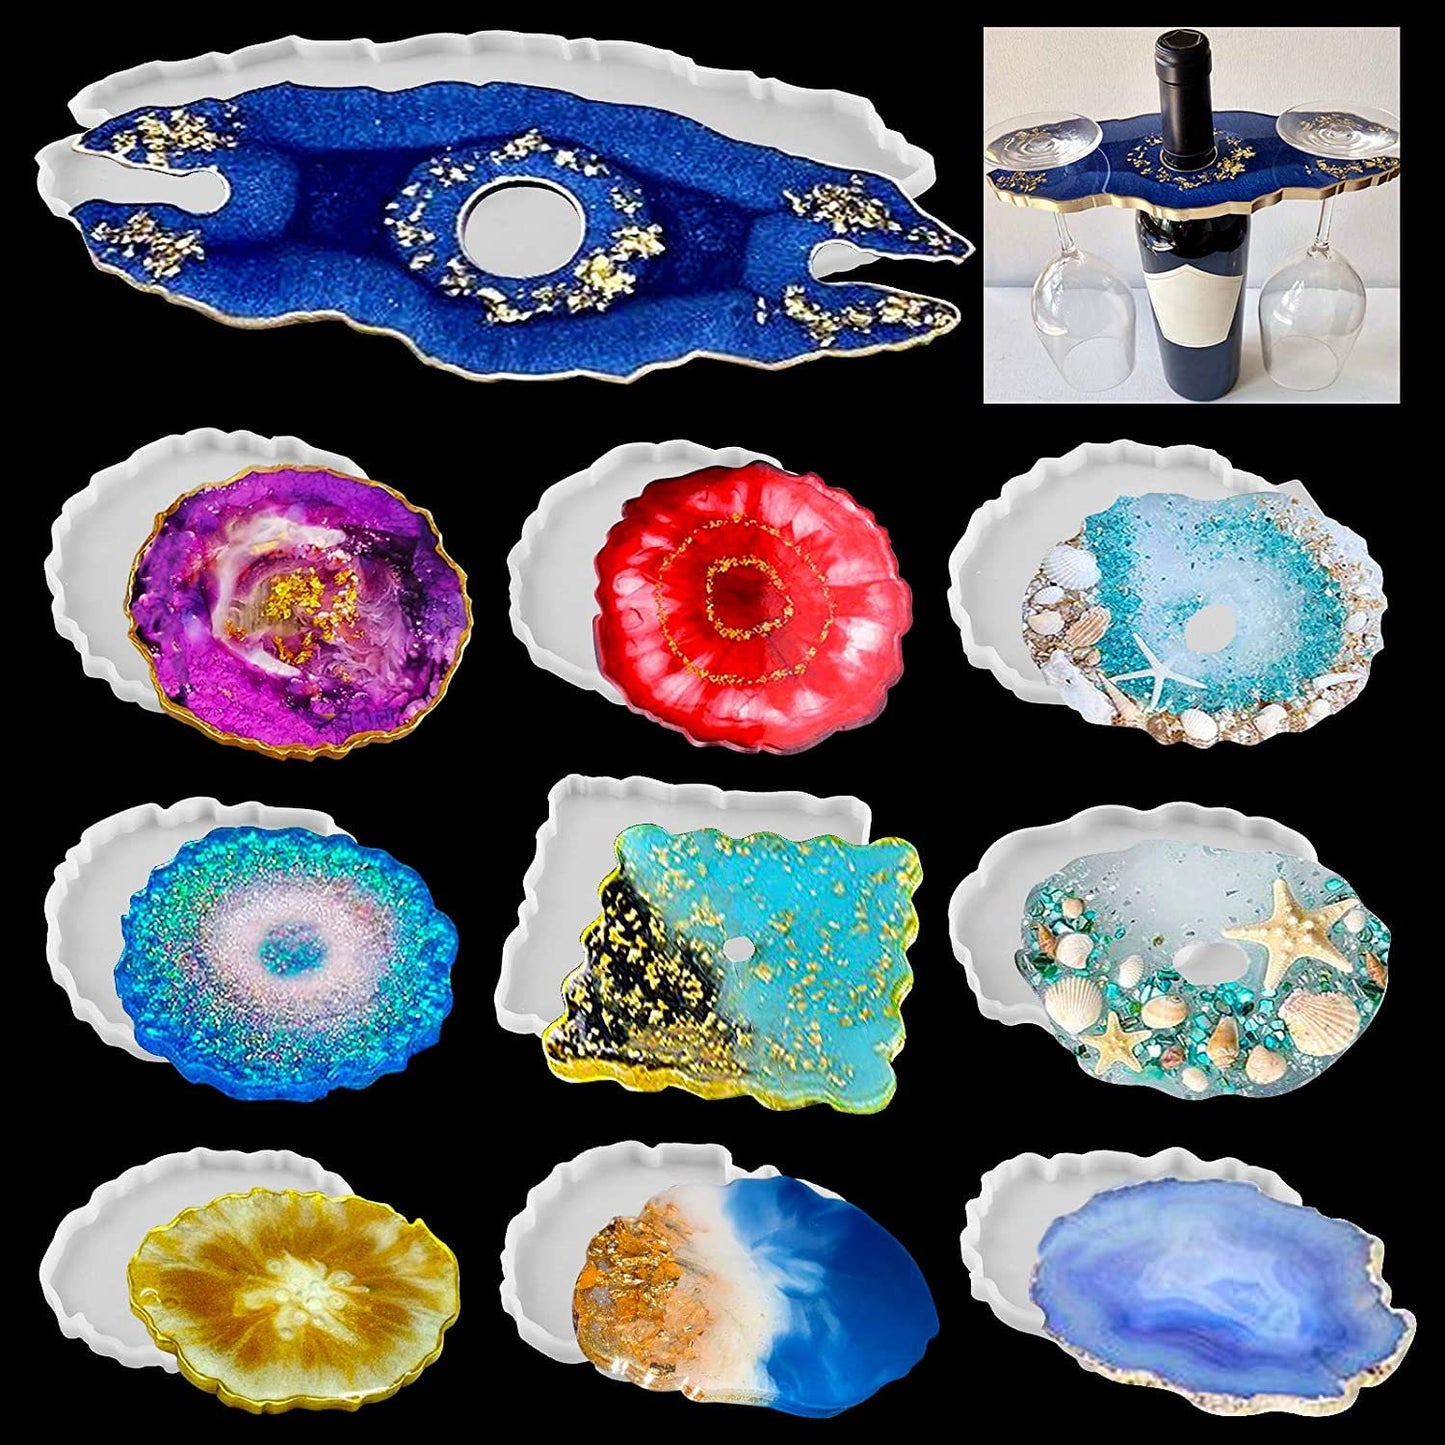 Geode Coaster Wine glass holder Resin Mold Set for Resin and Clay - 10pc Silicone Coaster Molds